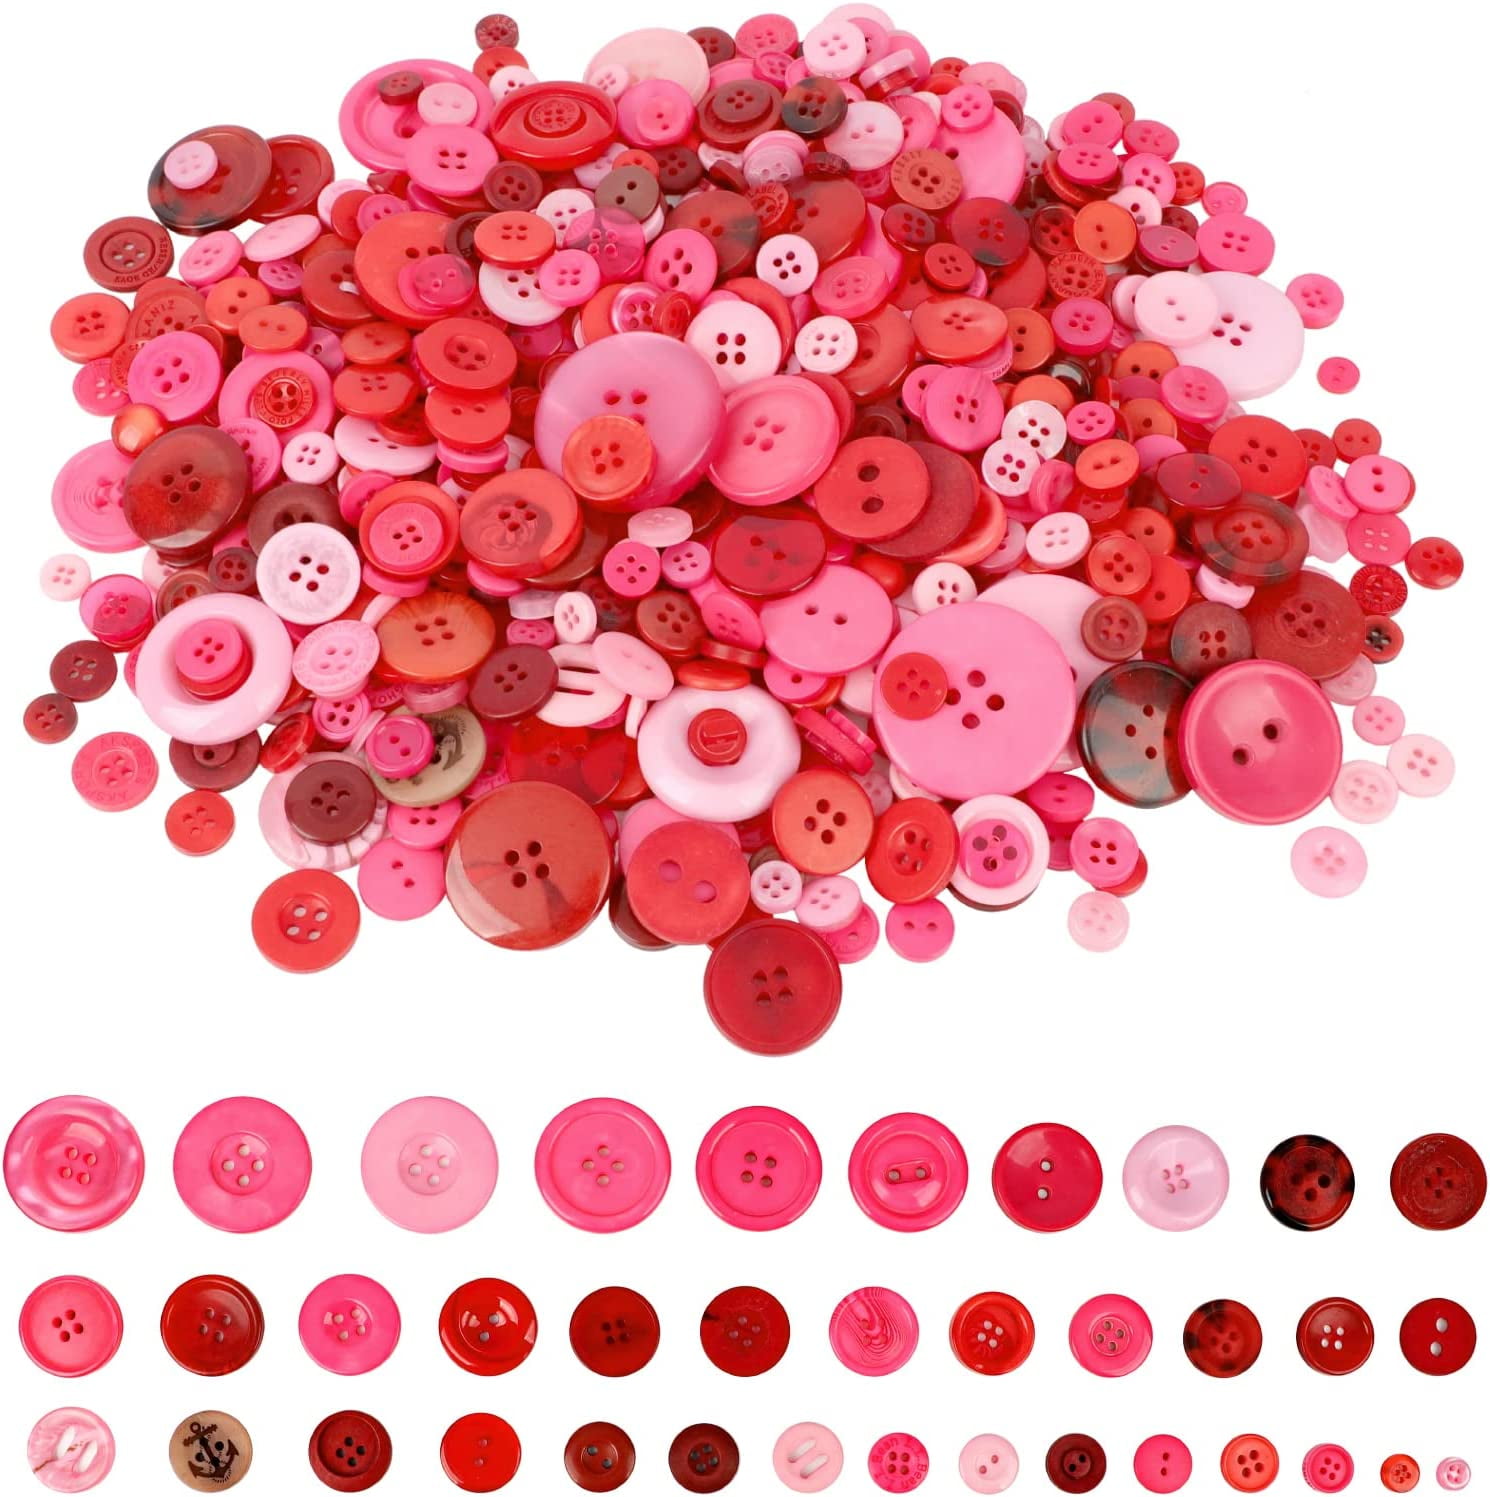  Swpeet 650 Pieces Assorted Sizes Resin Buttons 2 and 4 Holes  Round Craft Buttons for Sewing DIY Crafts Children's Manual Button Painting  (Red)